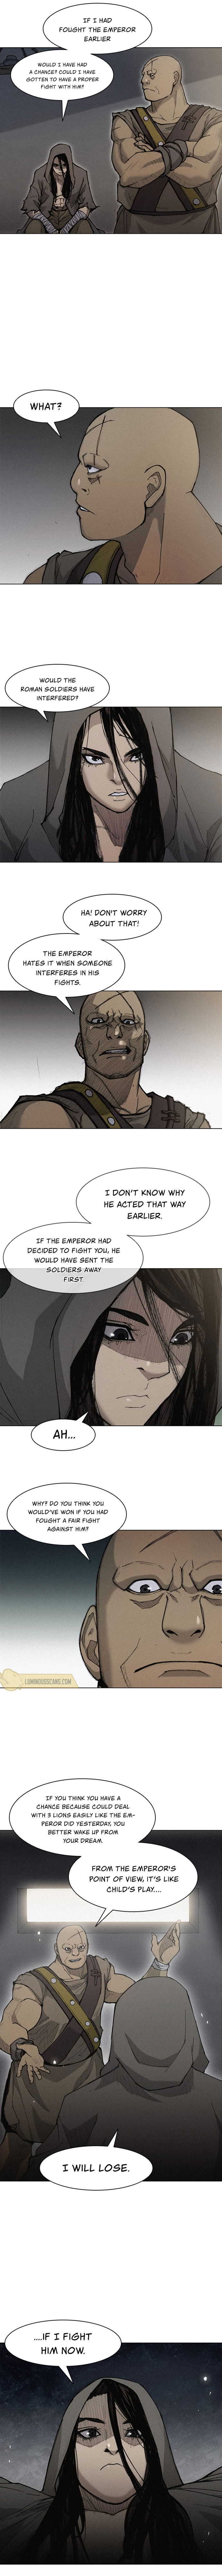 long-way-of-the-warrior-chap-22-5